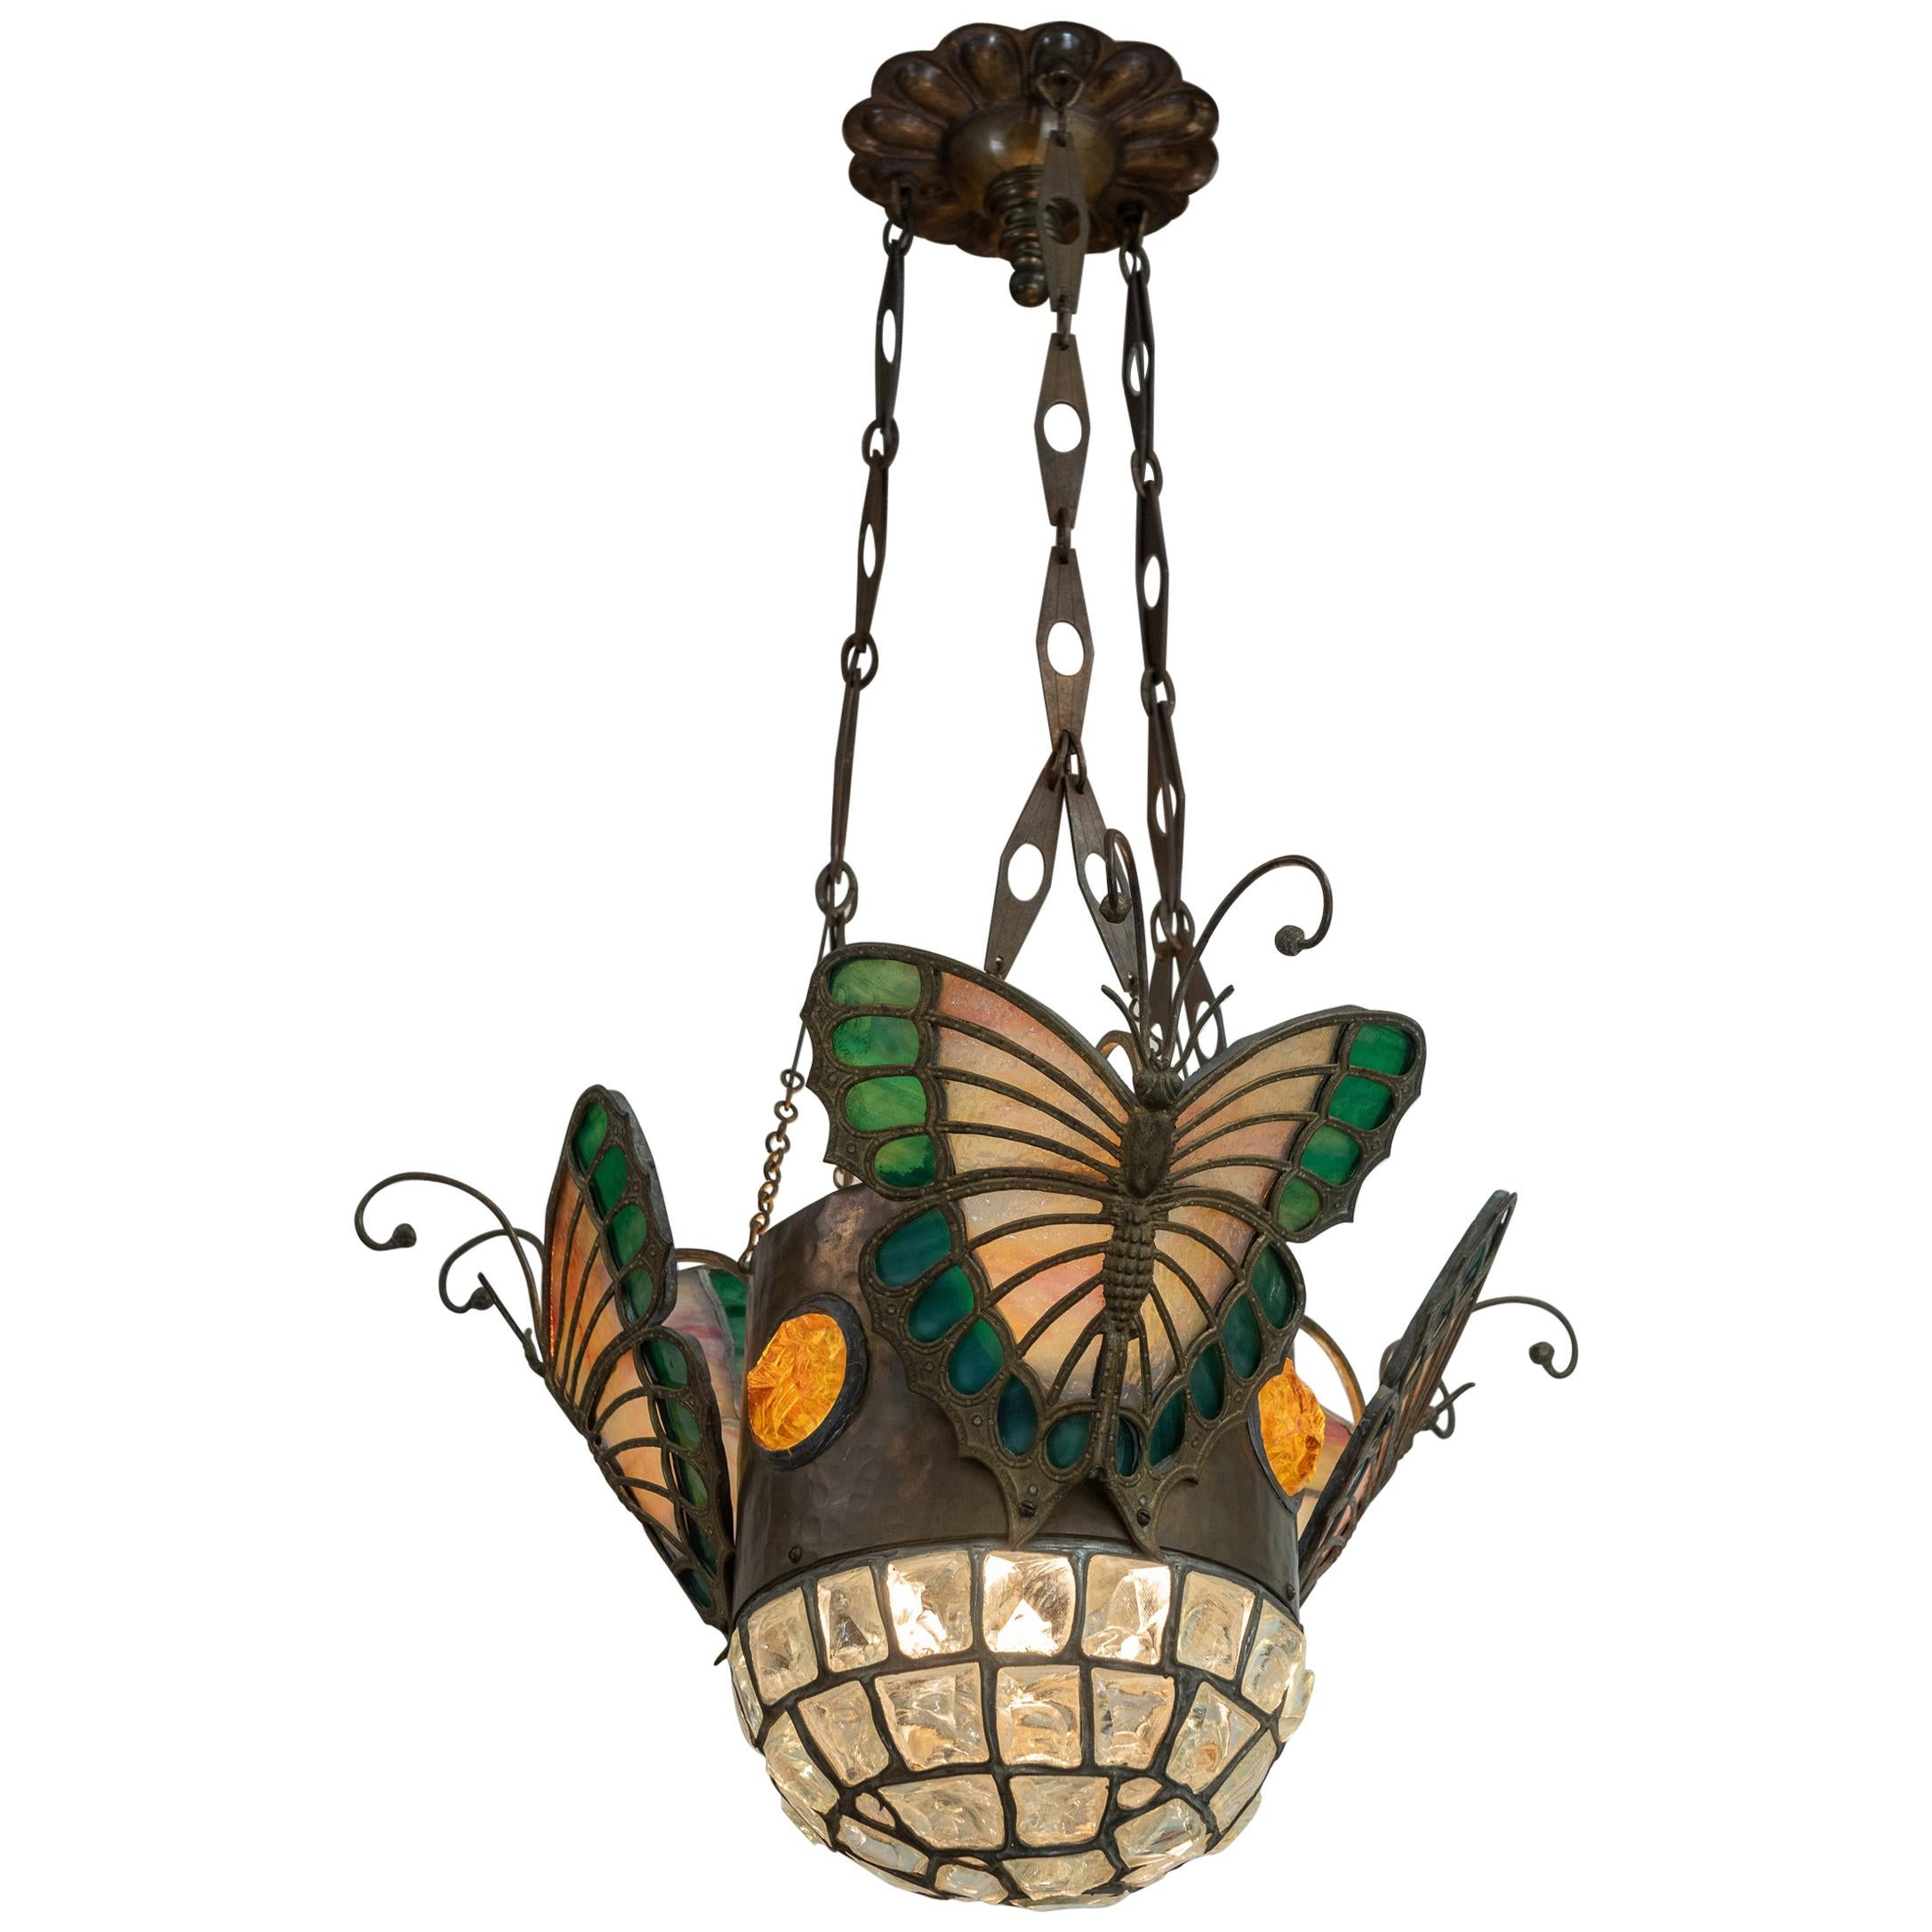 Austrian Art Nouveau Pendant with Leaded Glass Butterflies and Chunk Glass